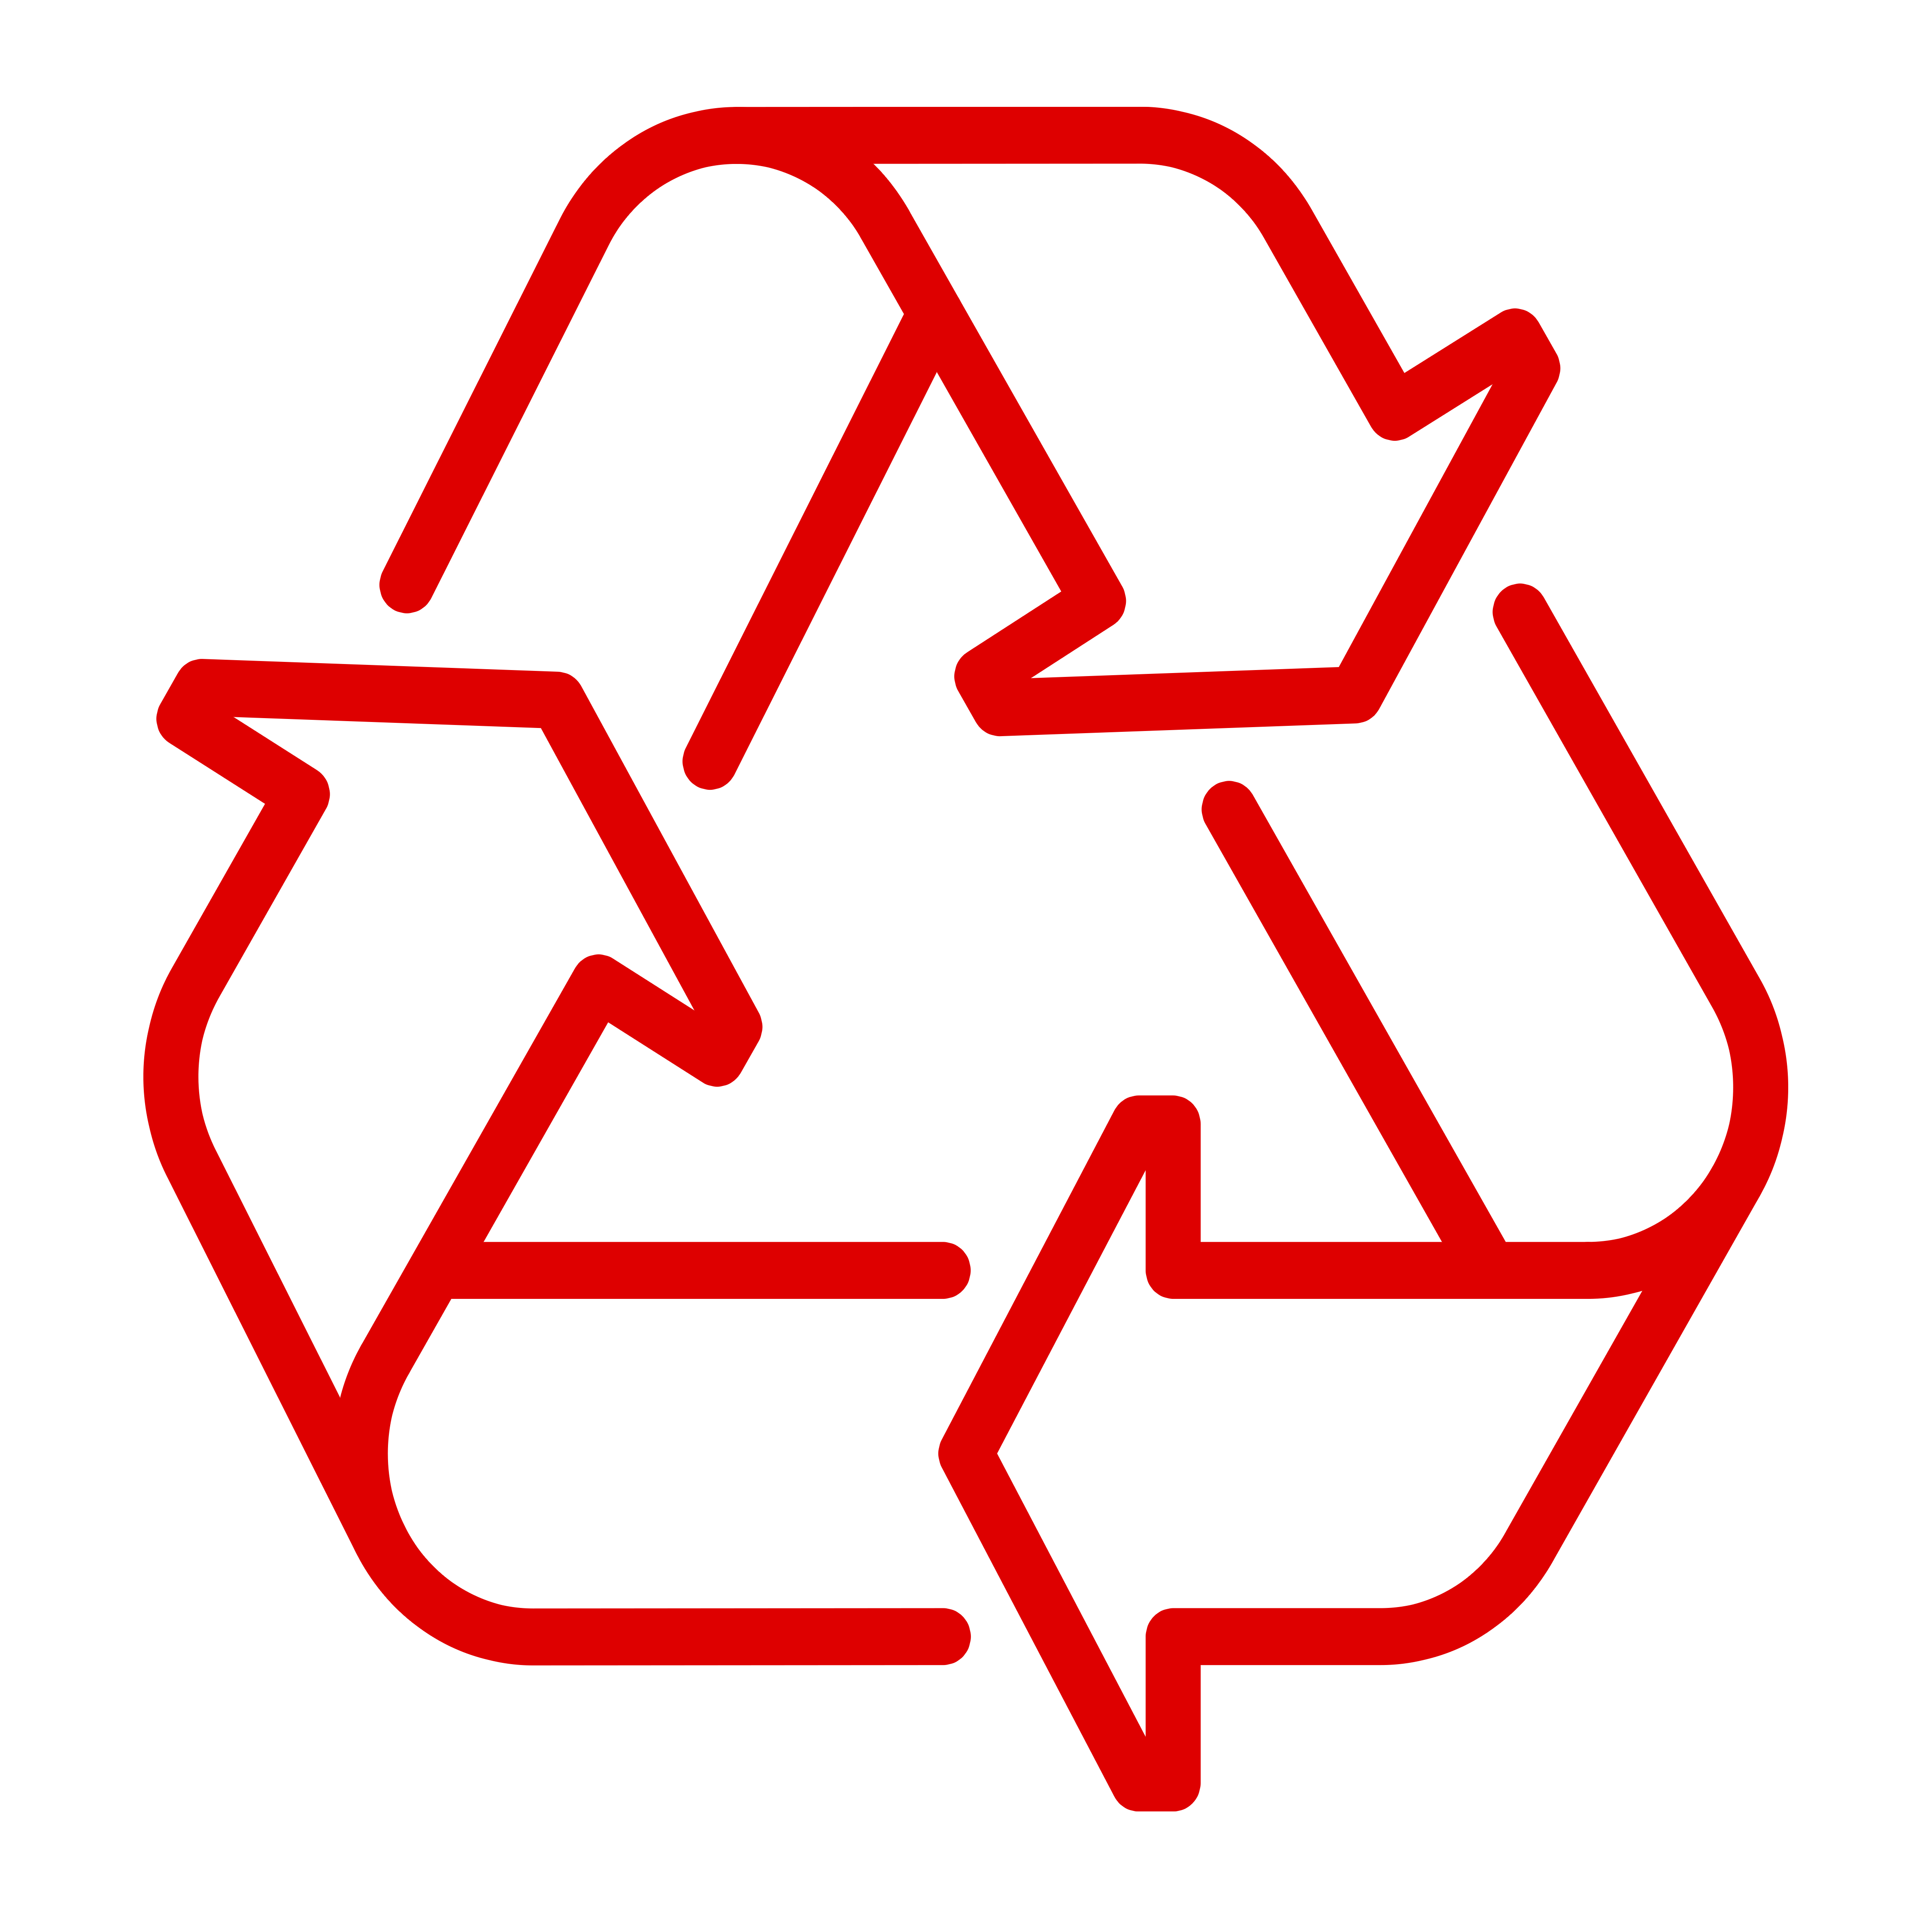 Differentiation <br>of the waste produced